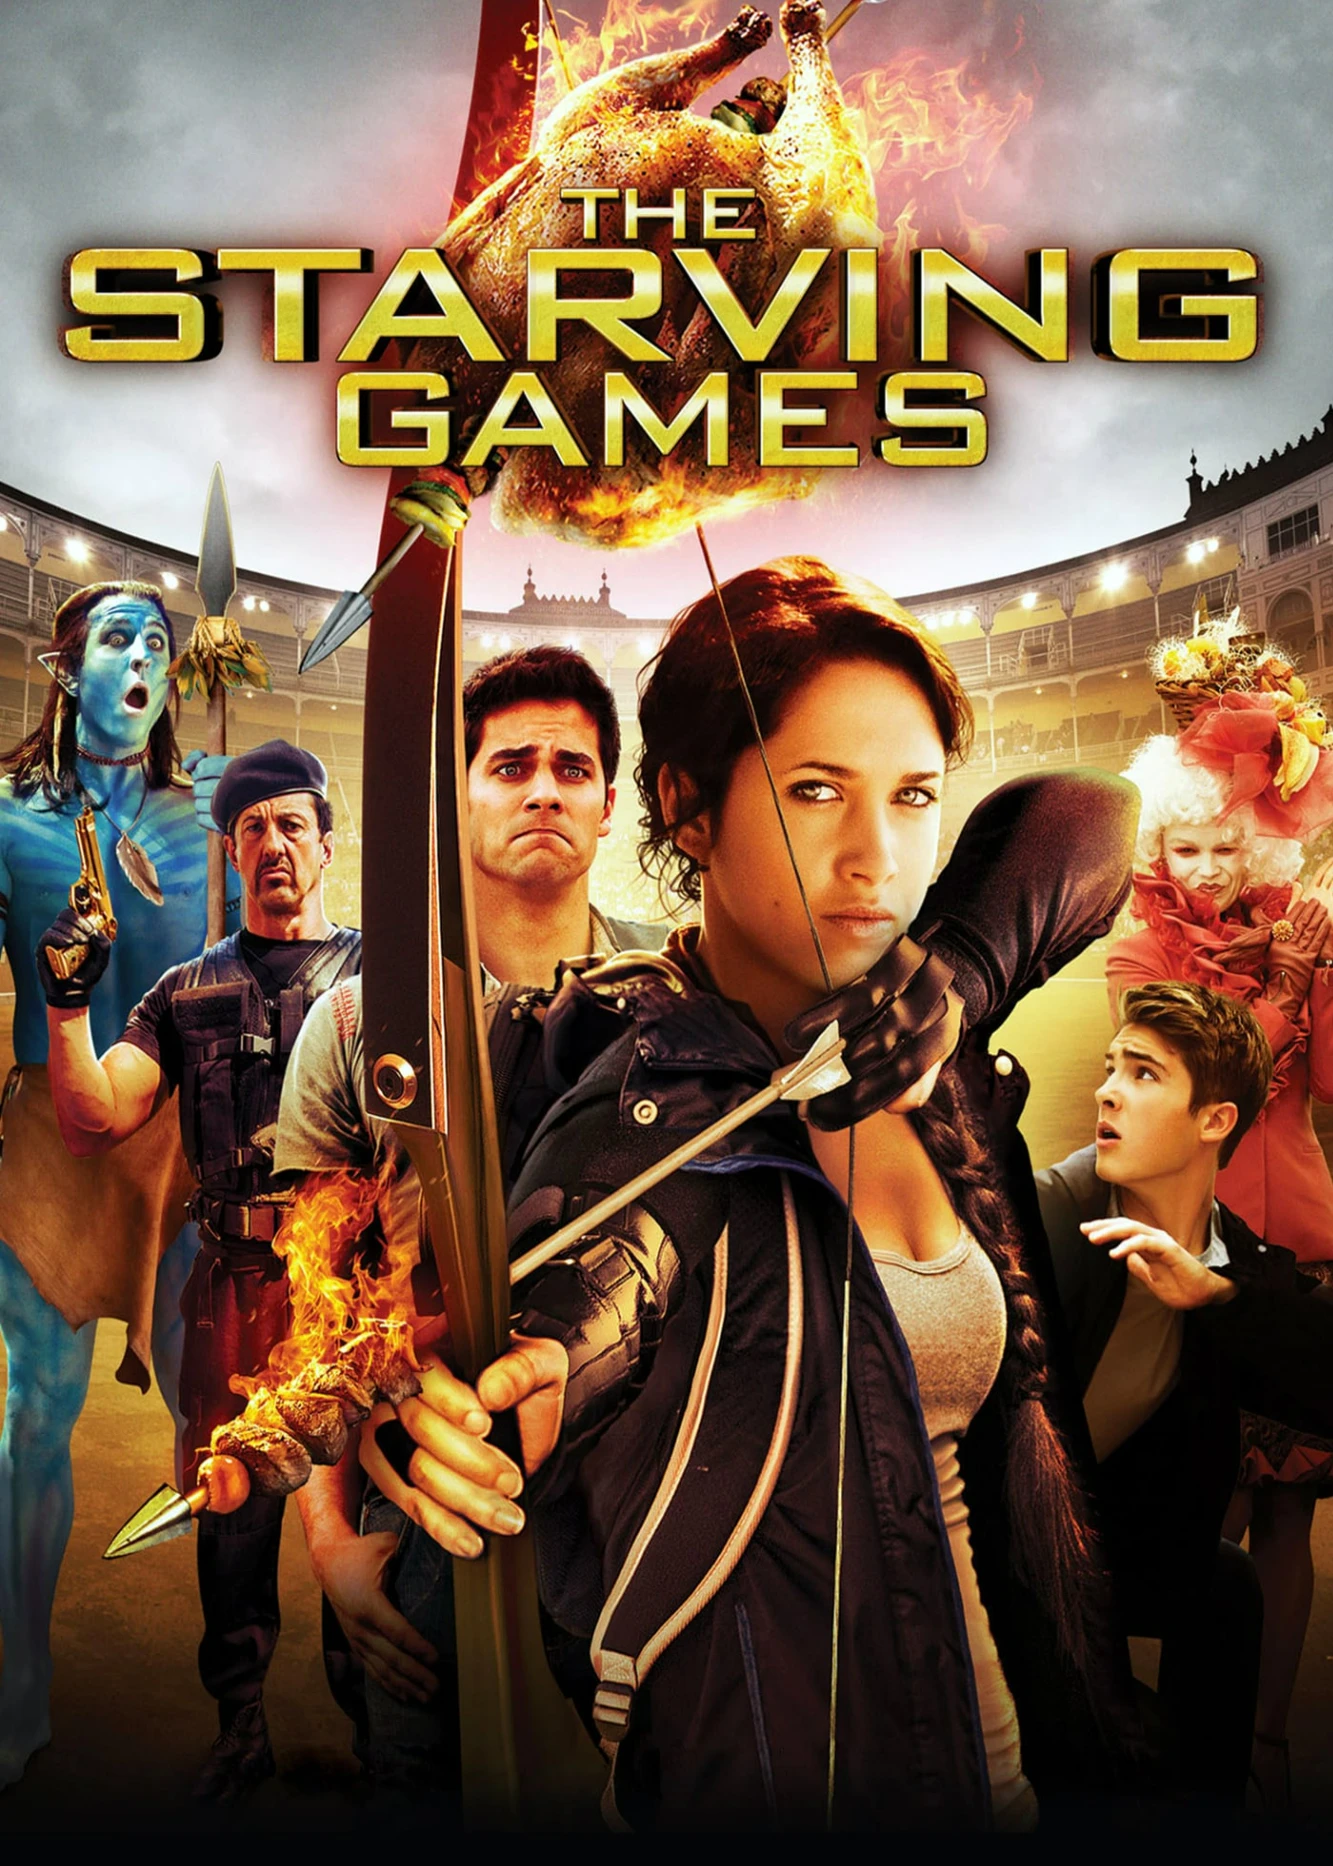 The Starving Games | The Starving Games (2013)